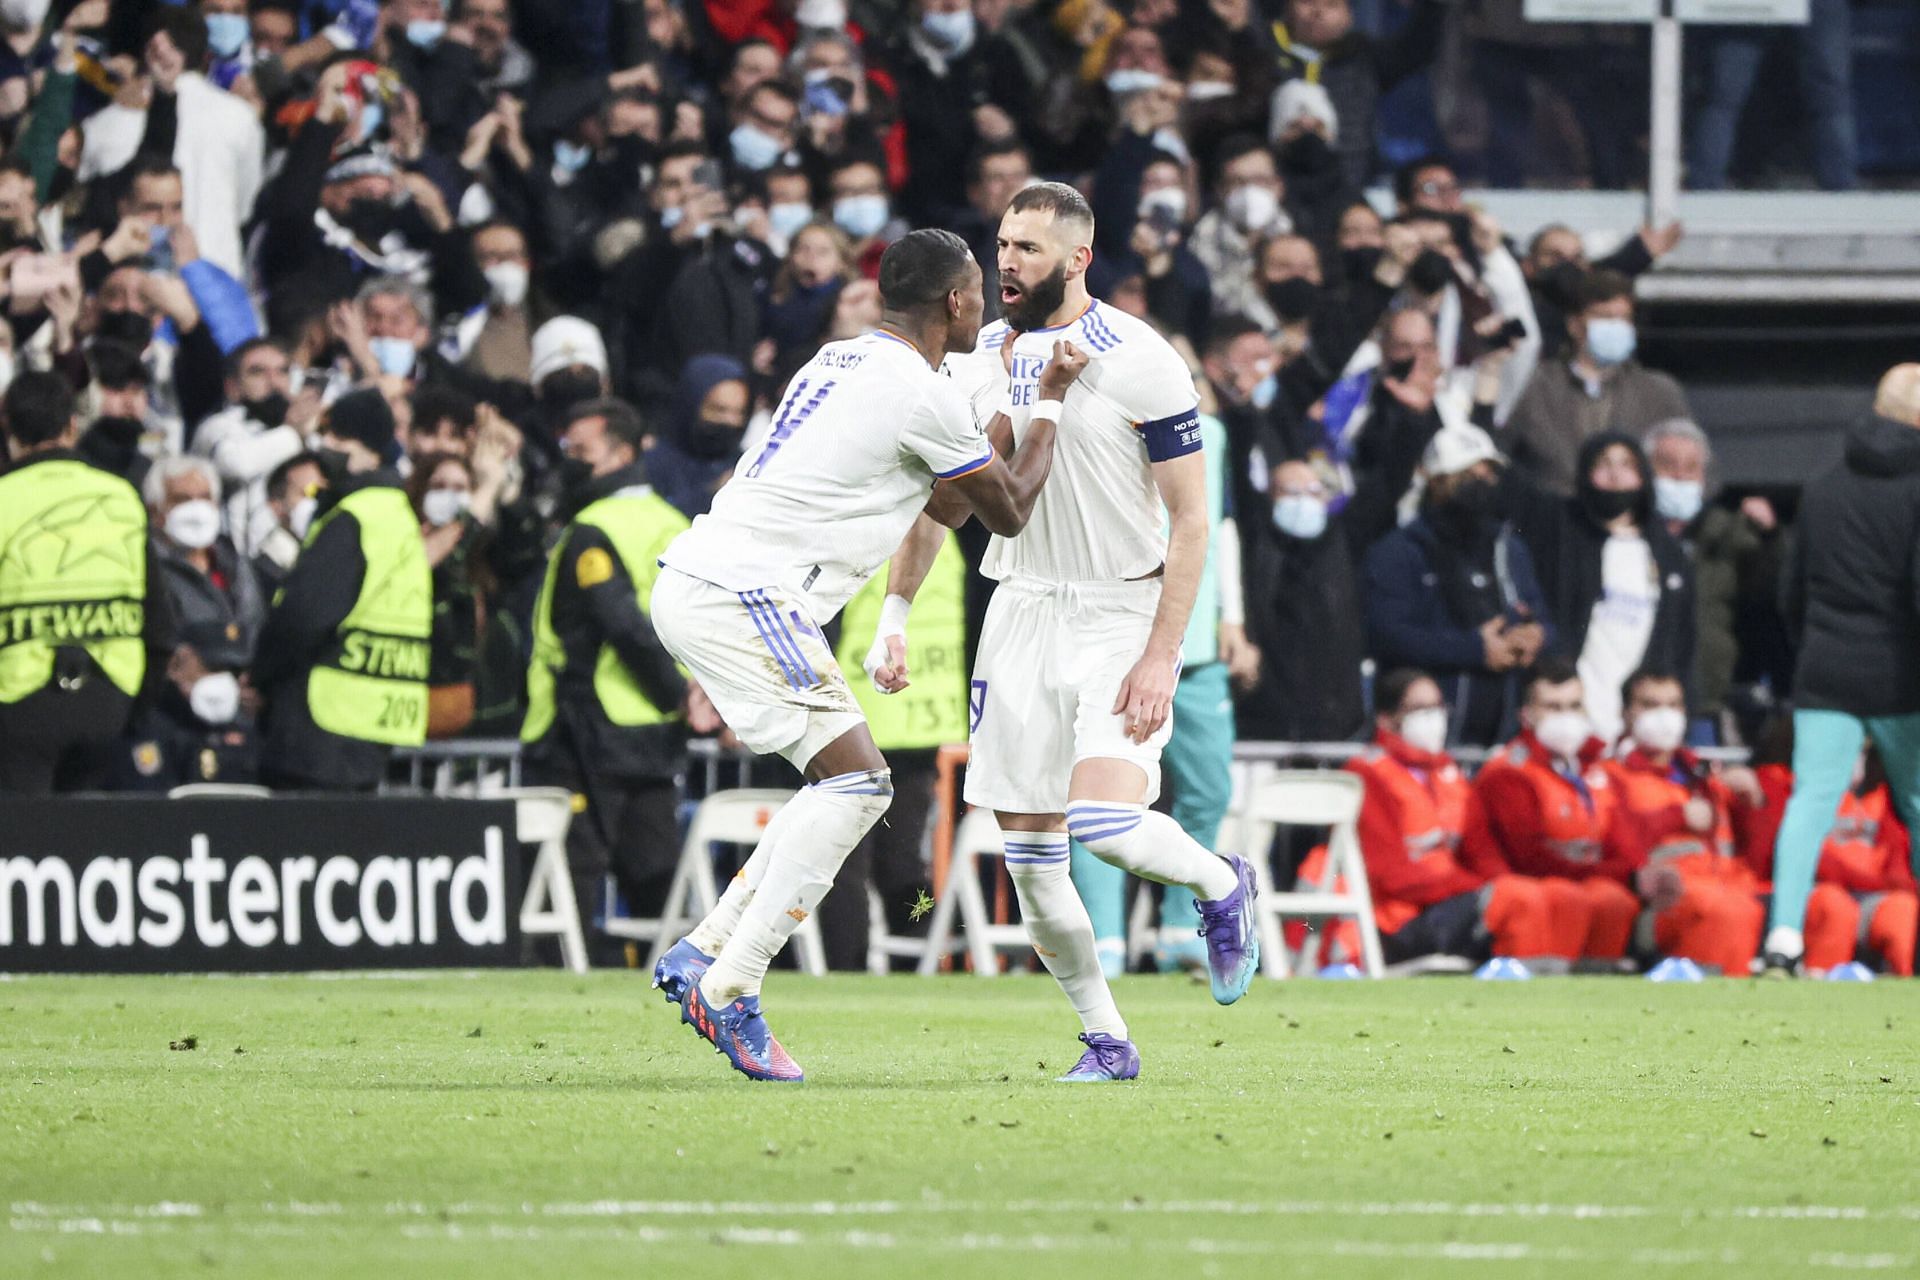 Real Madrid was superb in recording a comeback win against PSG